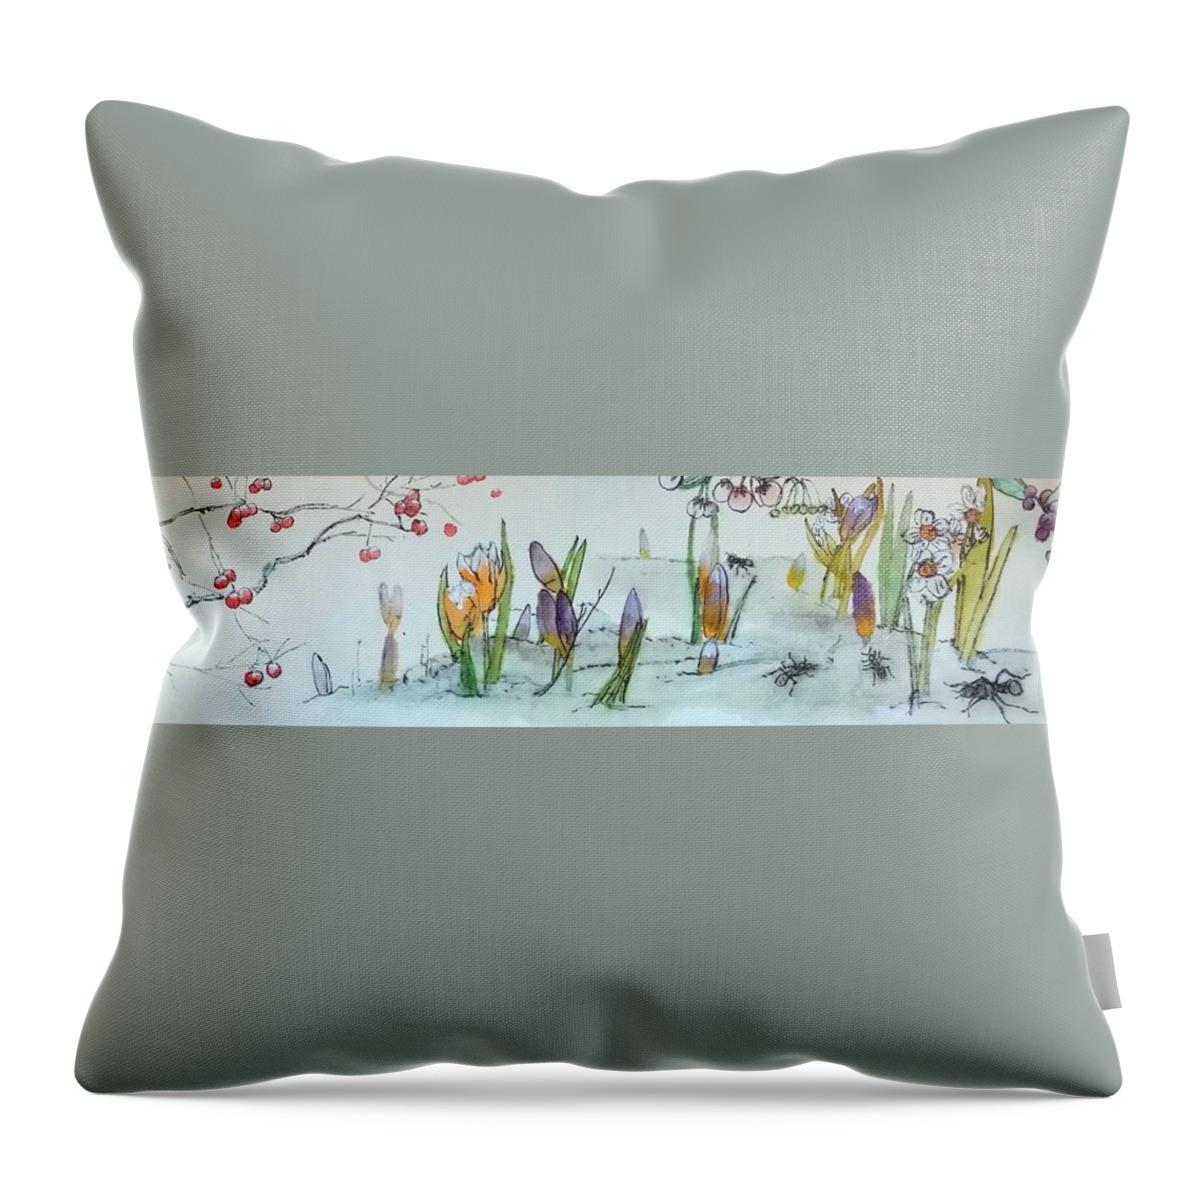 Botanical. Garden. Flowers. Seasons. Insects. Throw Pillow featuring the painting Seasons Come With Flowers Each by Debbi Saccomanno Chan